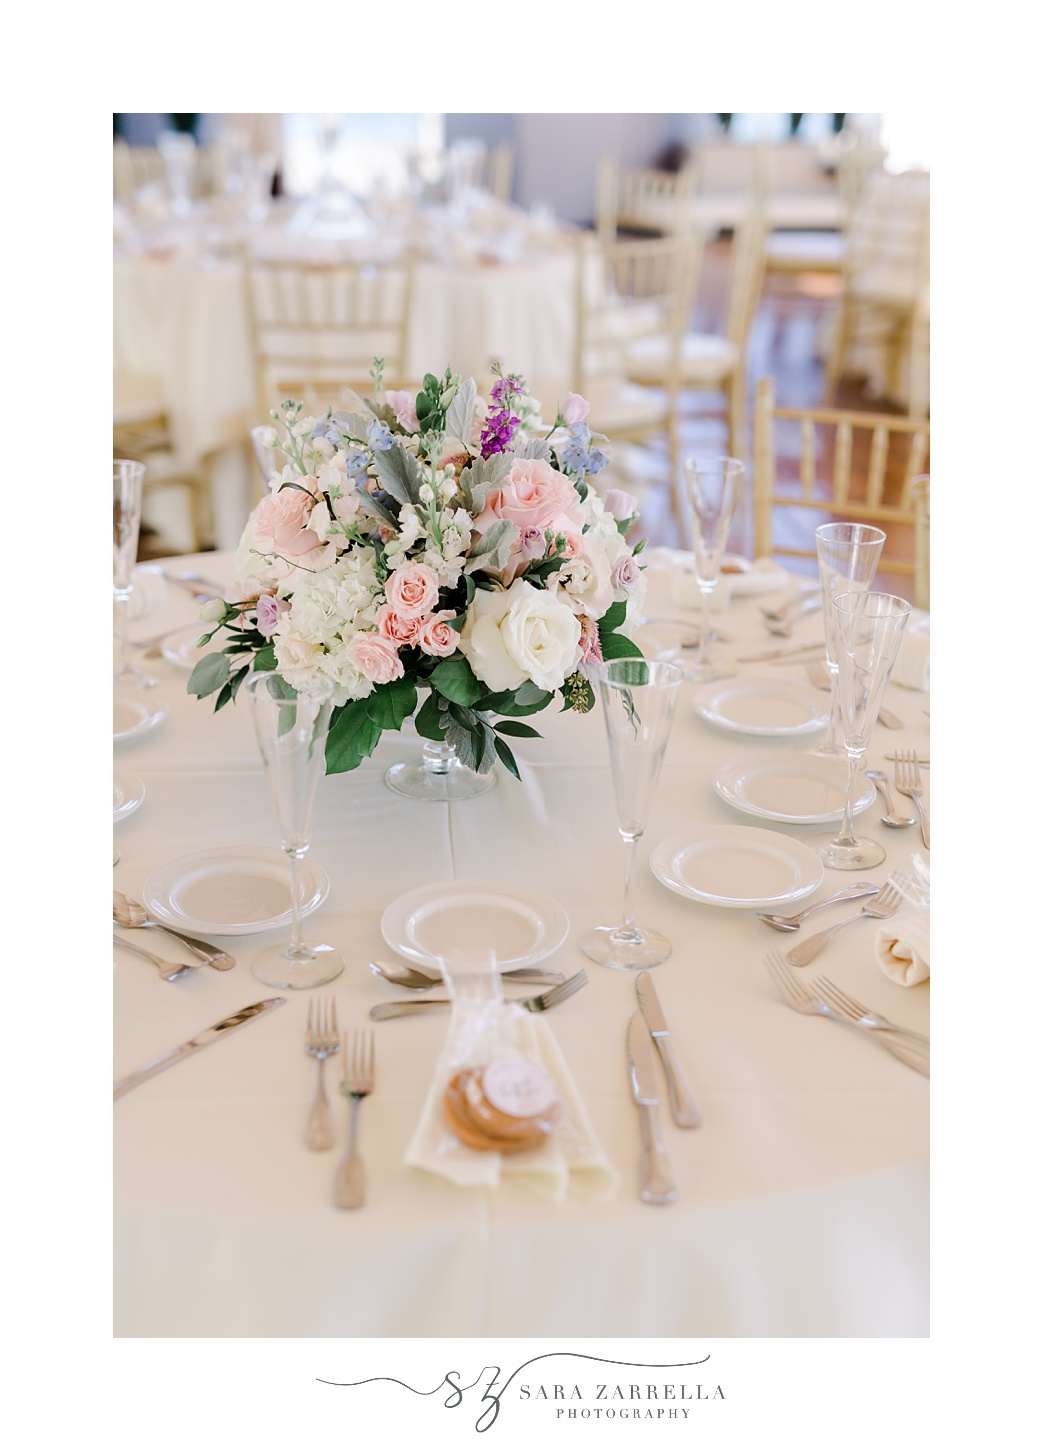 wedding reception at Regatta Place with pink and white floral centerpiece 